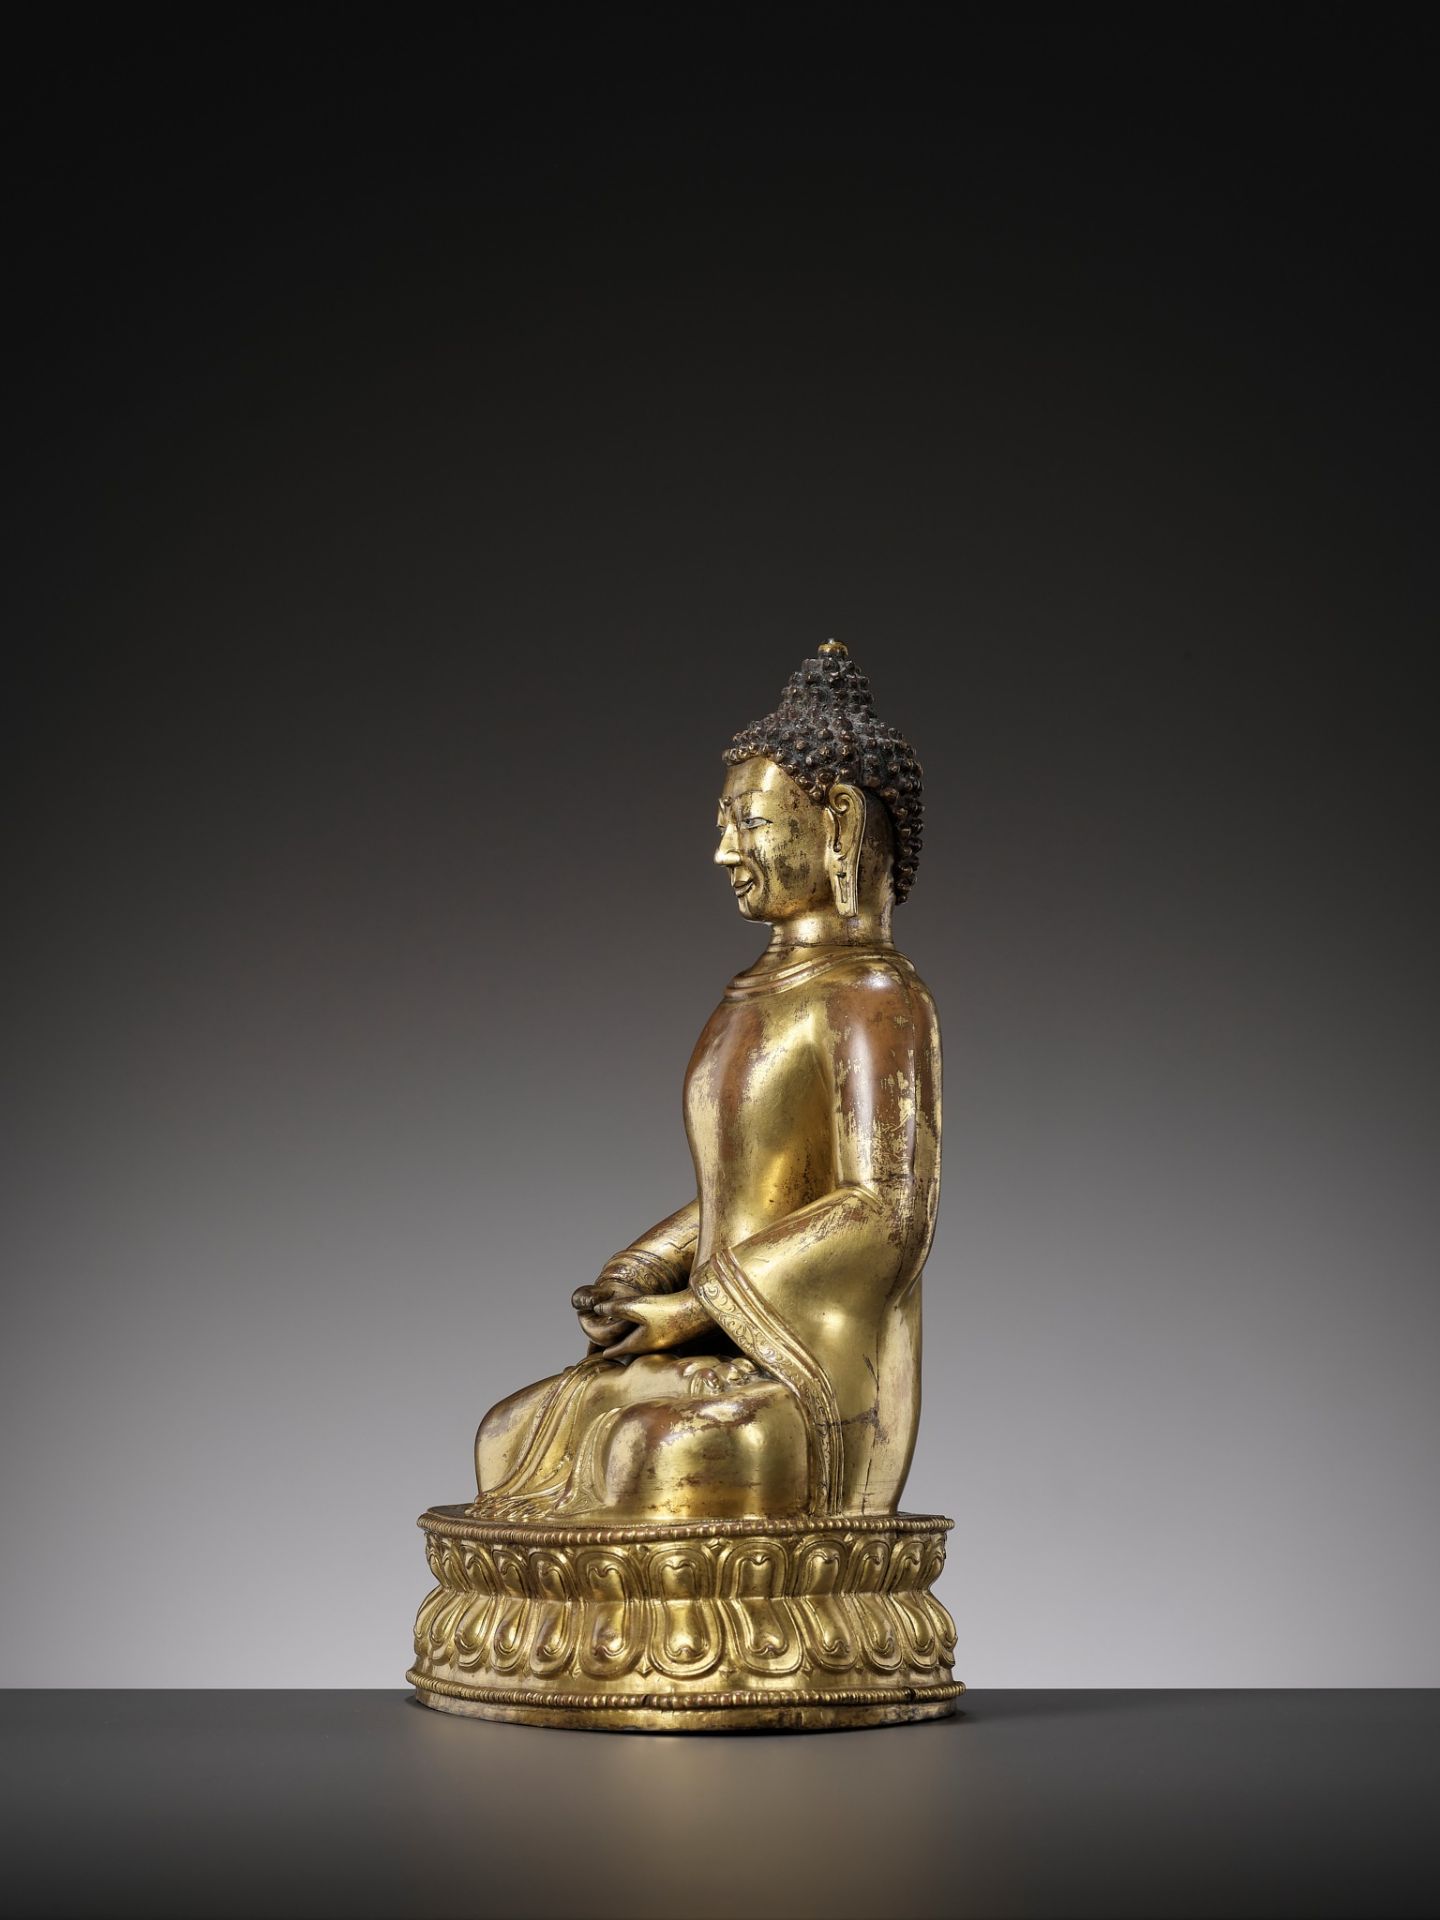 A GILT COPPER-ALLOY REPOUSSE FIGURE OF BUDDHA AMITABHA, WITH AN INSCRIPTION REFERRING TO THE SECOND - Image 11 of 16